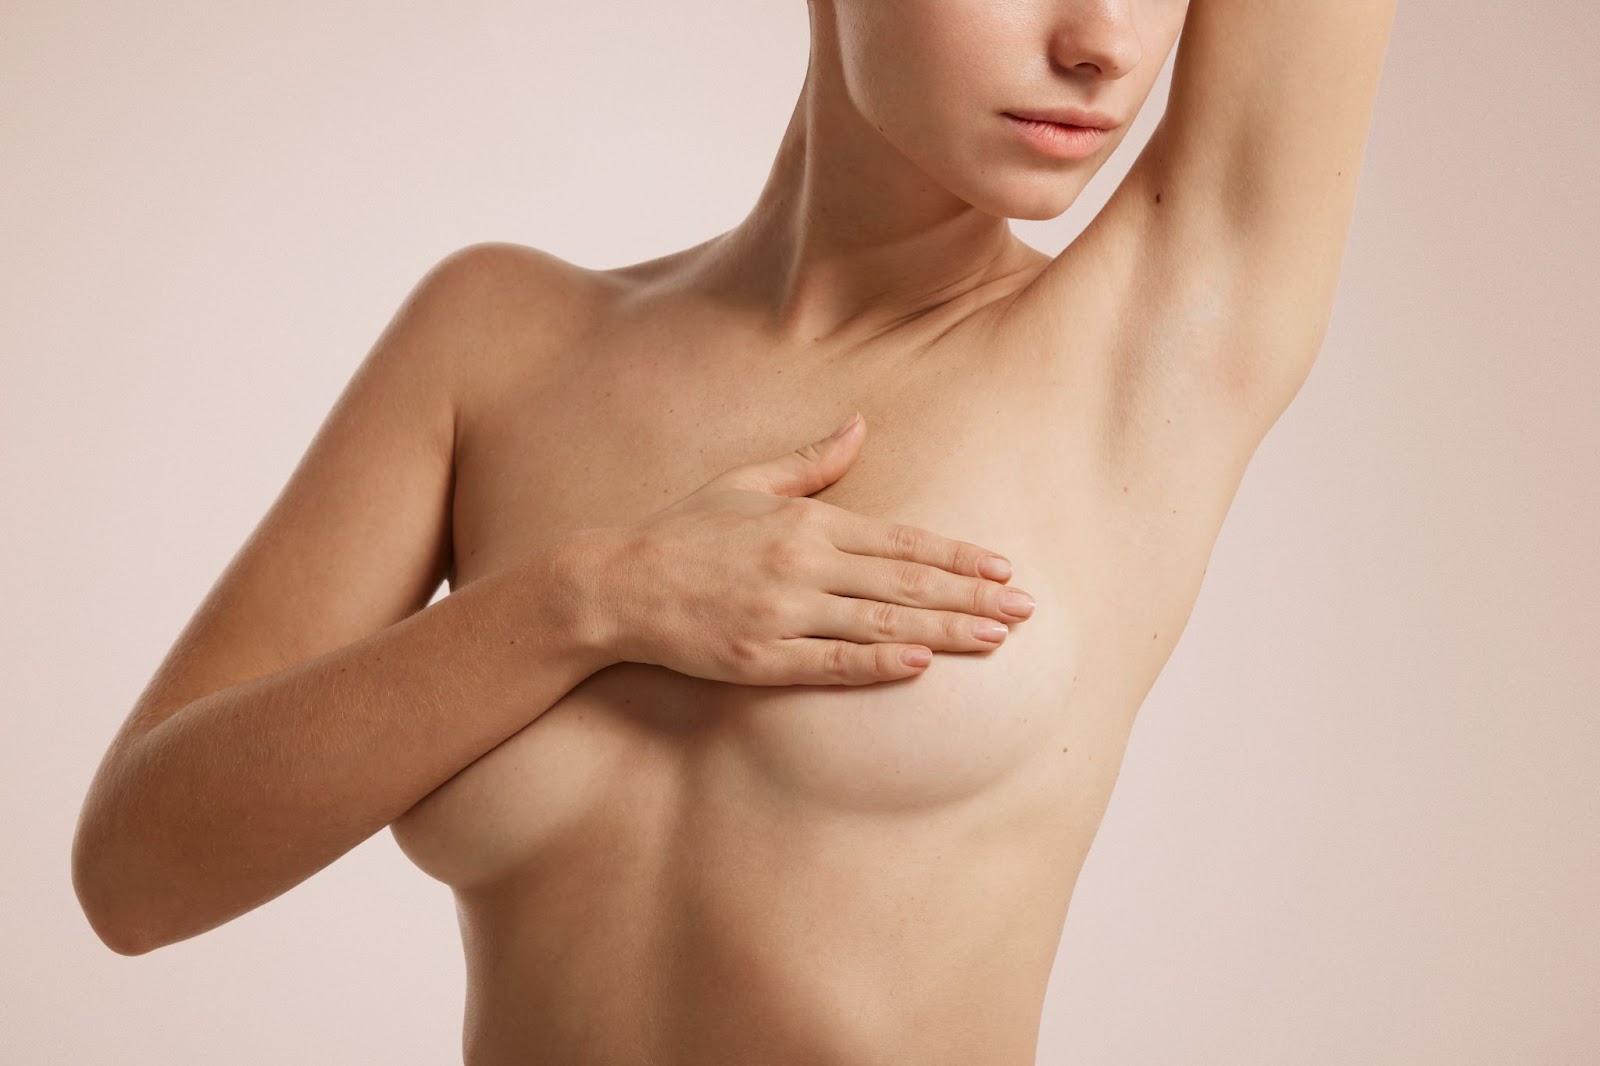 Will health insurance cover my breast reduction?